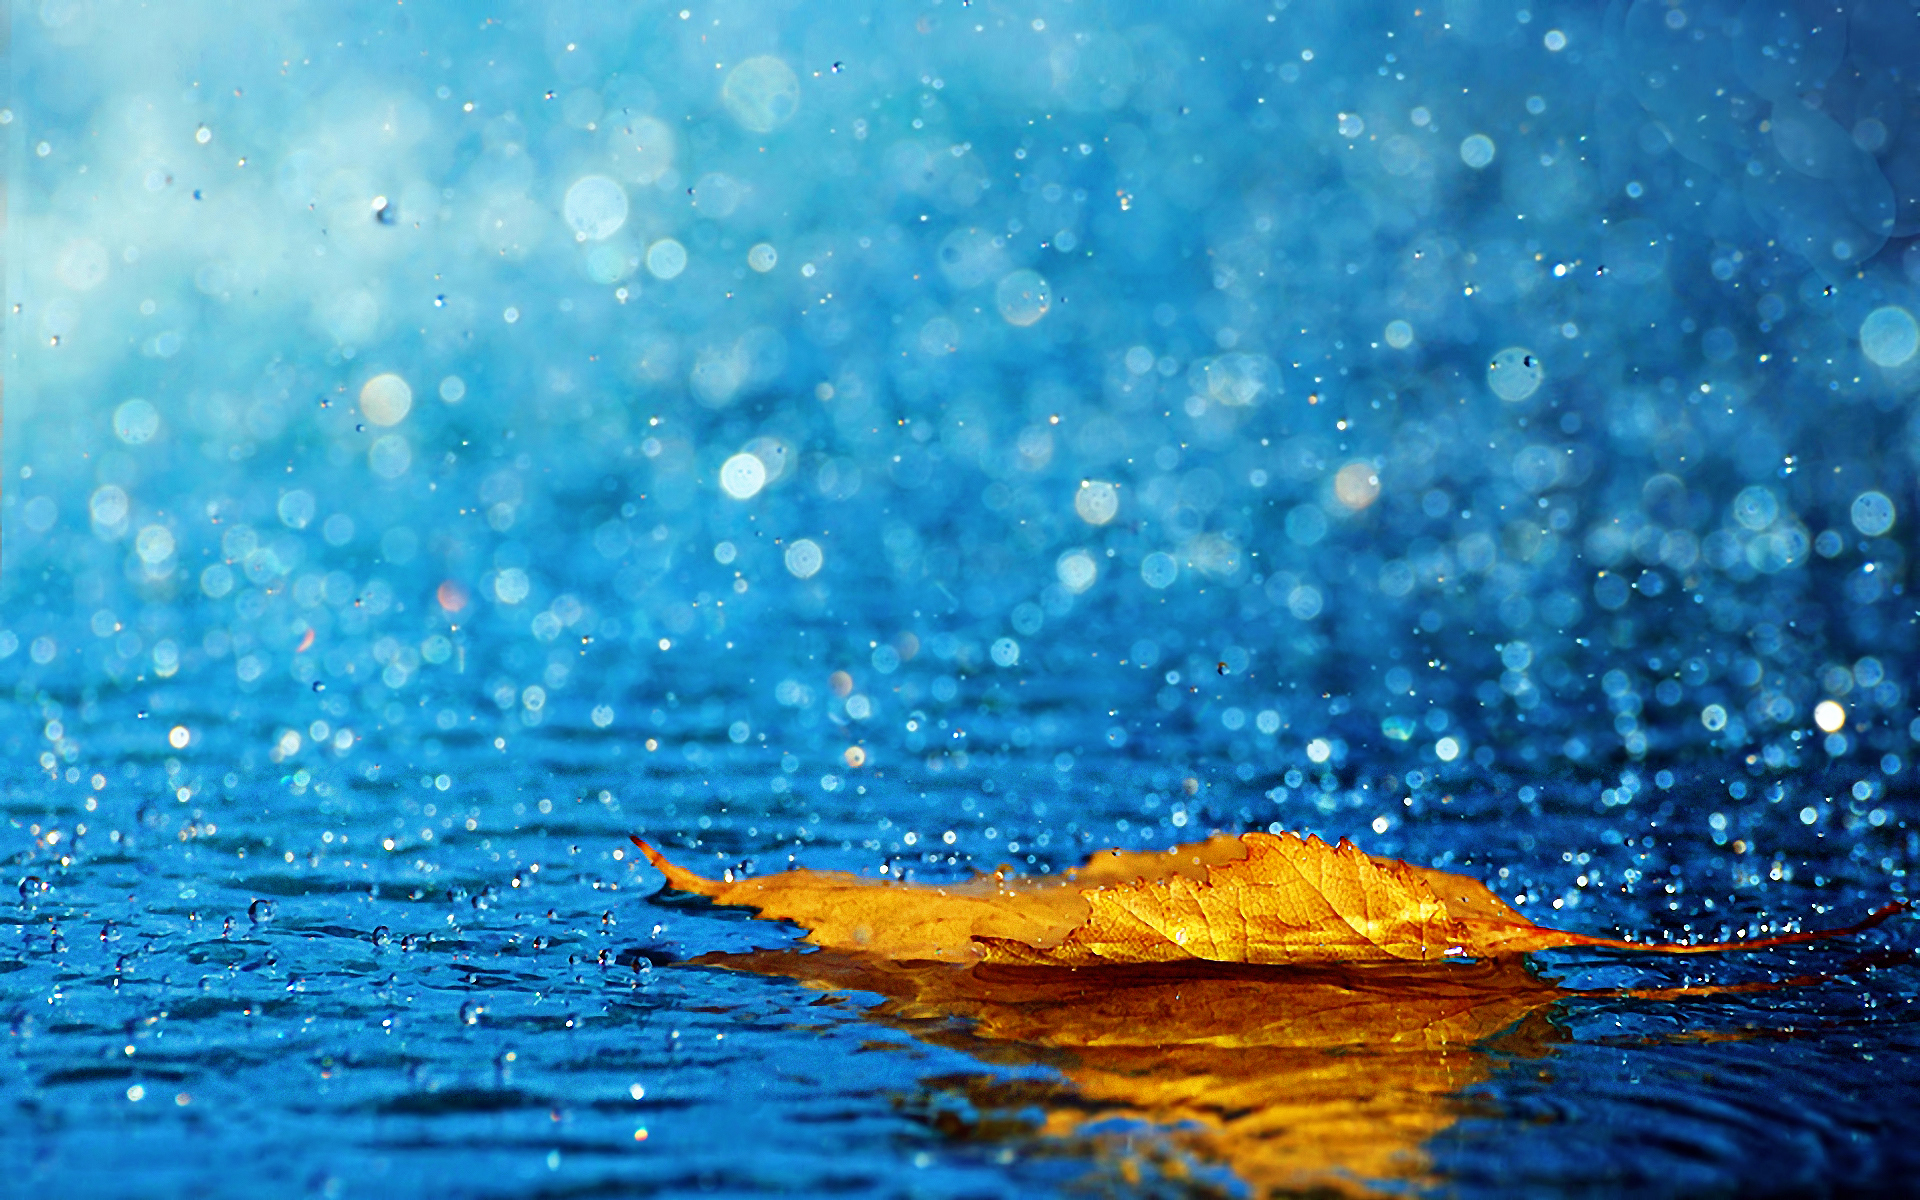 Rain HD Wallpaper For Desktop One Pictures Background